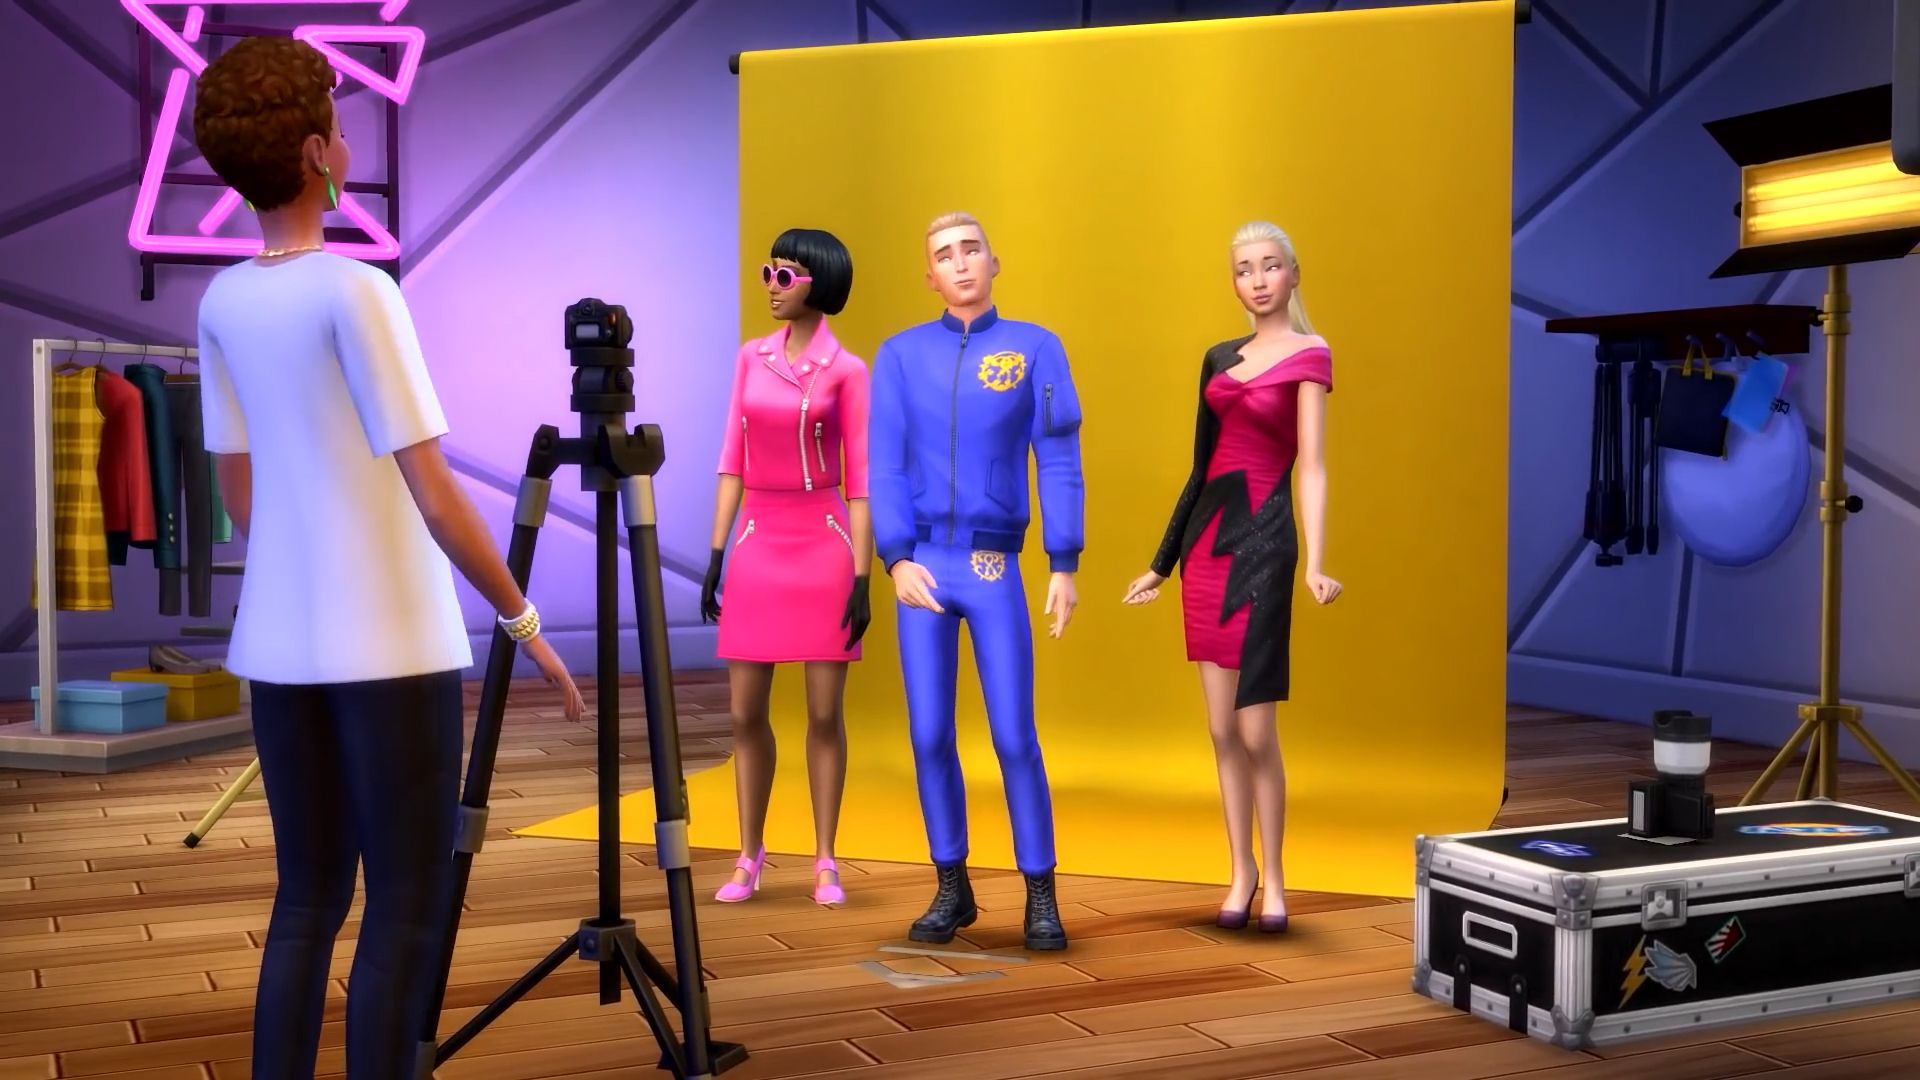 The Sims 4 Moschino Stuff Pack Guide